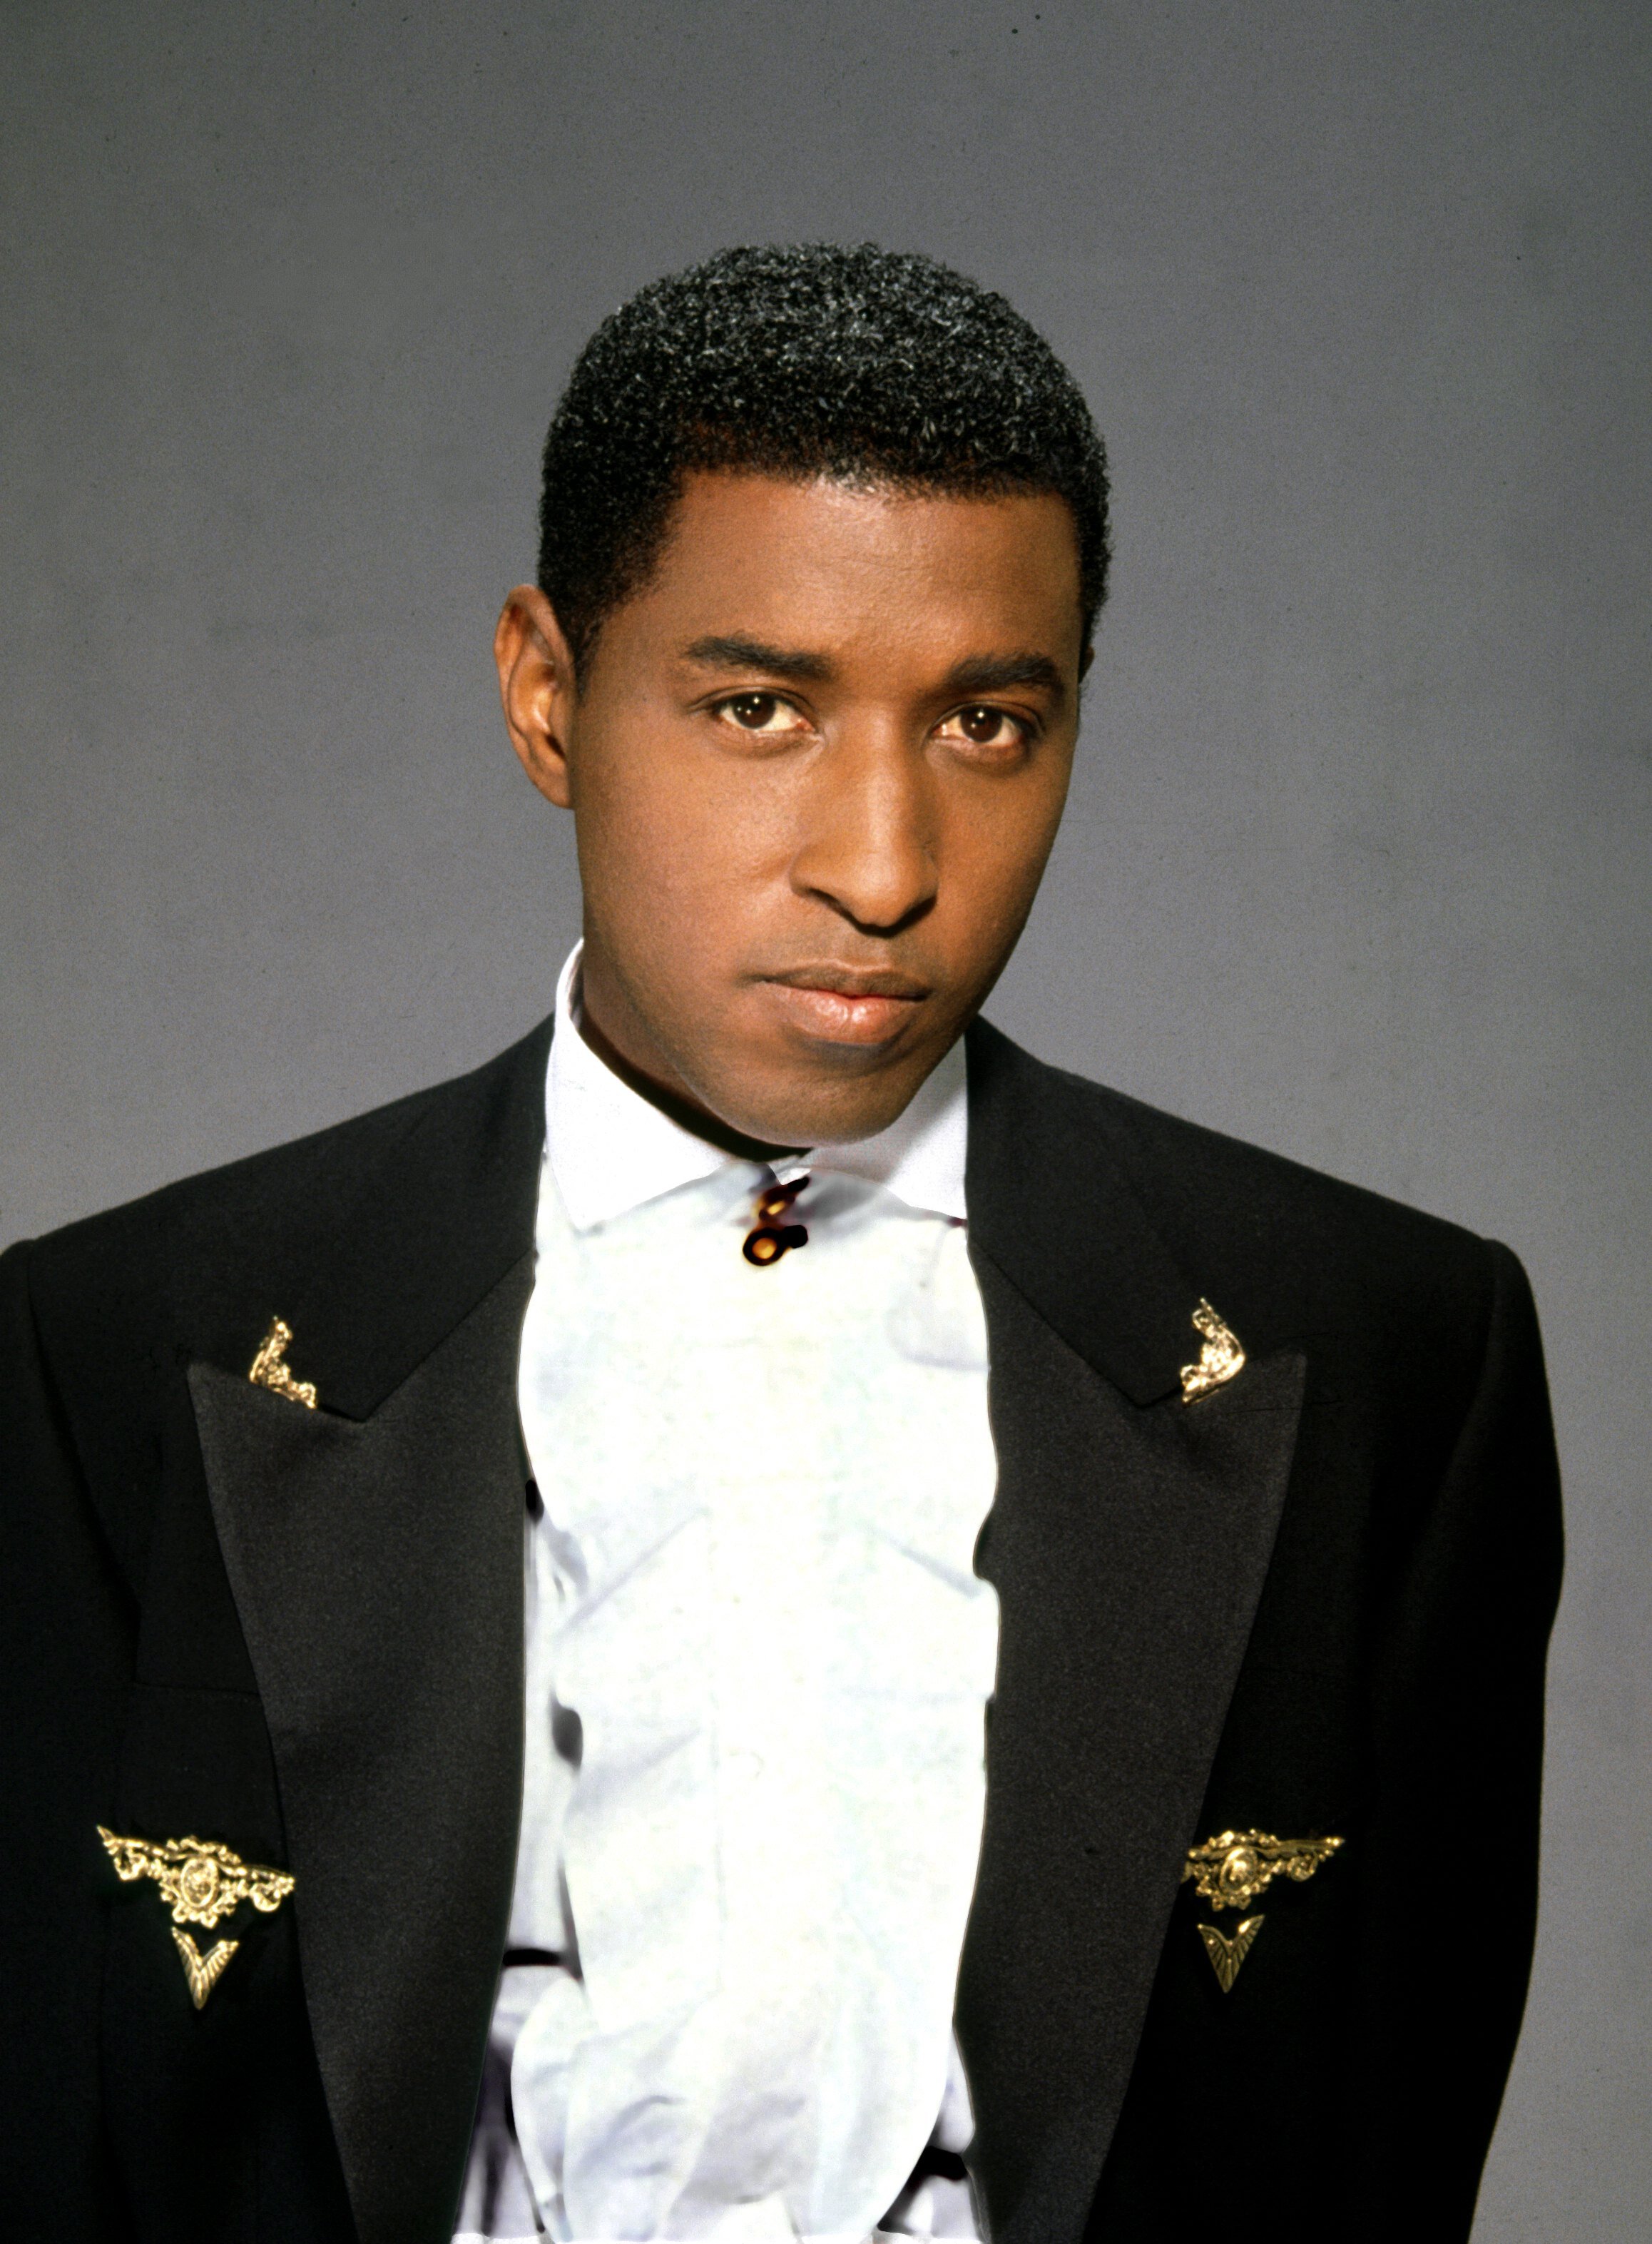 Babyface during a portrait session in 1992. | Photo: Getty Images